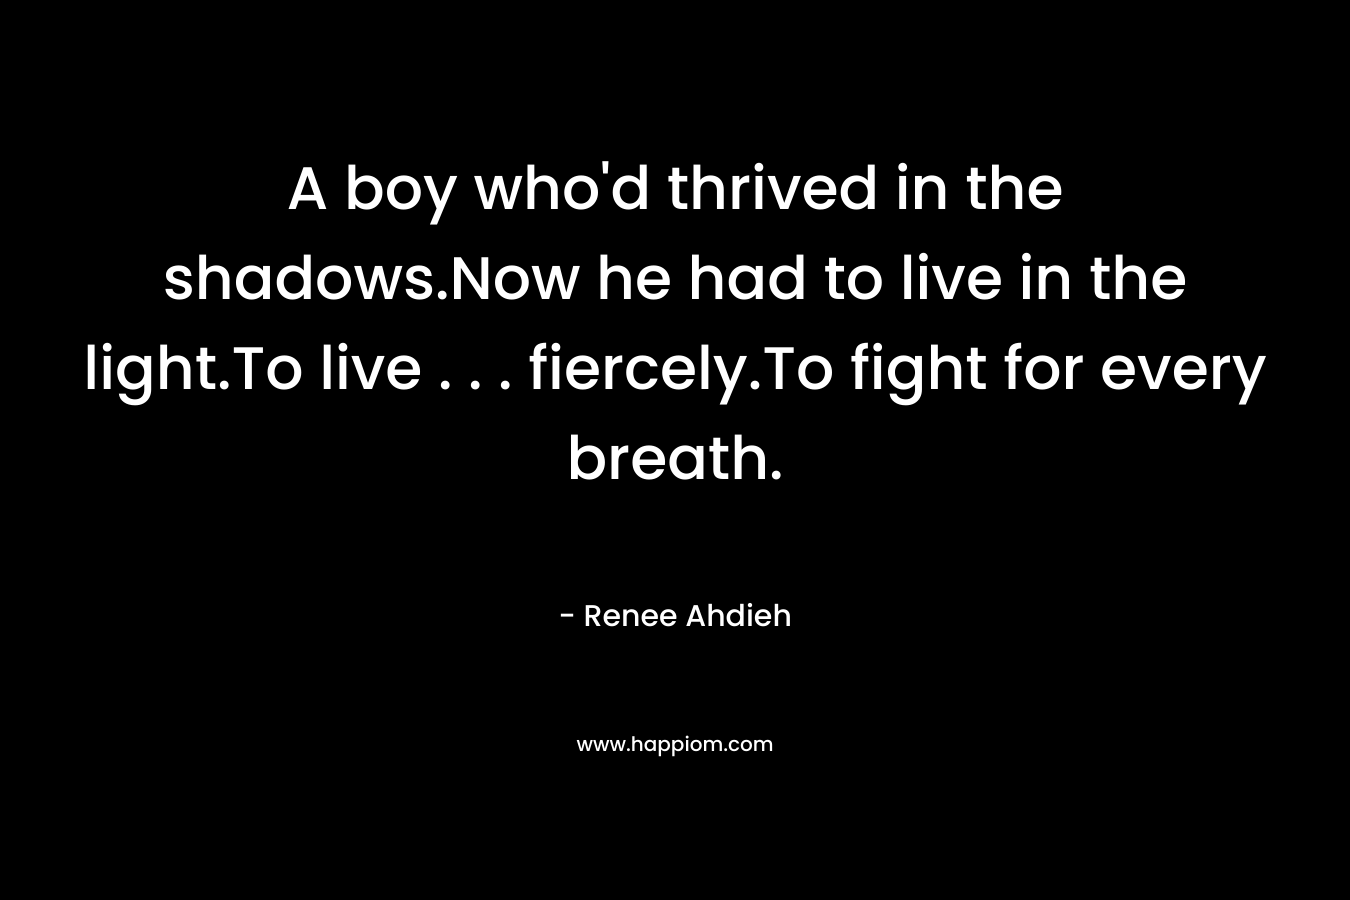 A boy who’d thrived in the shadows.Now he had to live in the light.To live . . . fiercely.To fight for every breath. – Renee Ahdieh